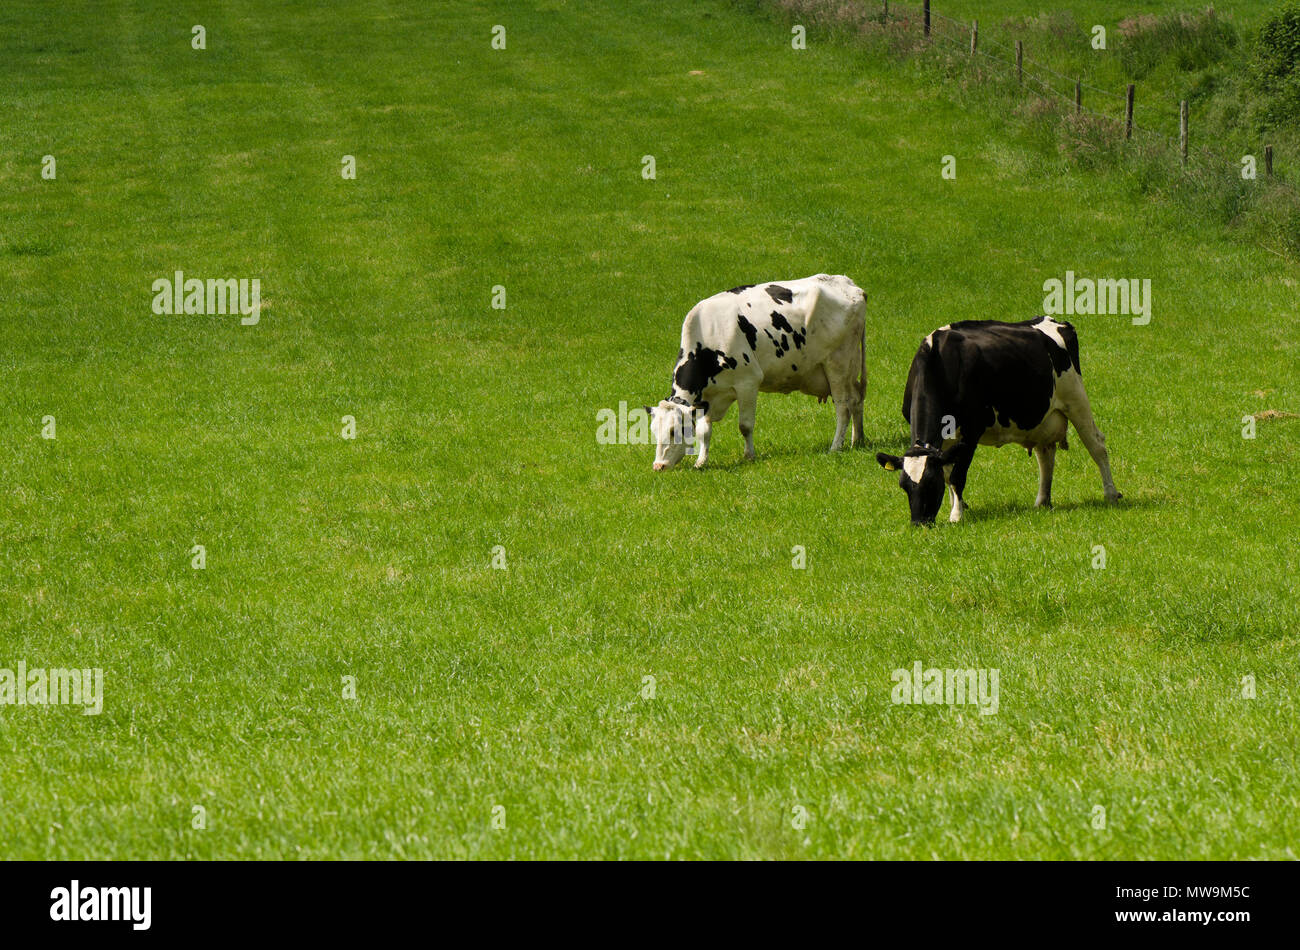 Les bovins laitiers , Cows grazing in grass field, Limbourg, Pays-Bas. Banque D'Images